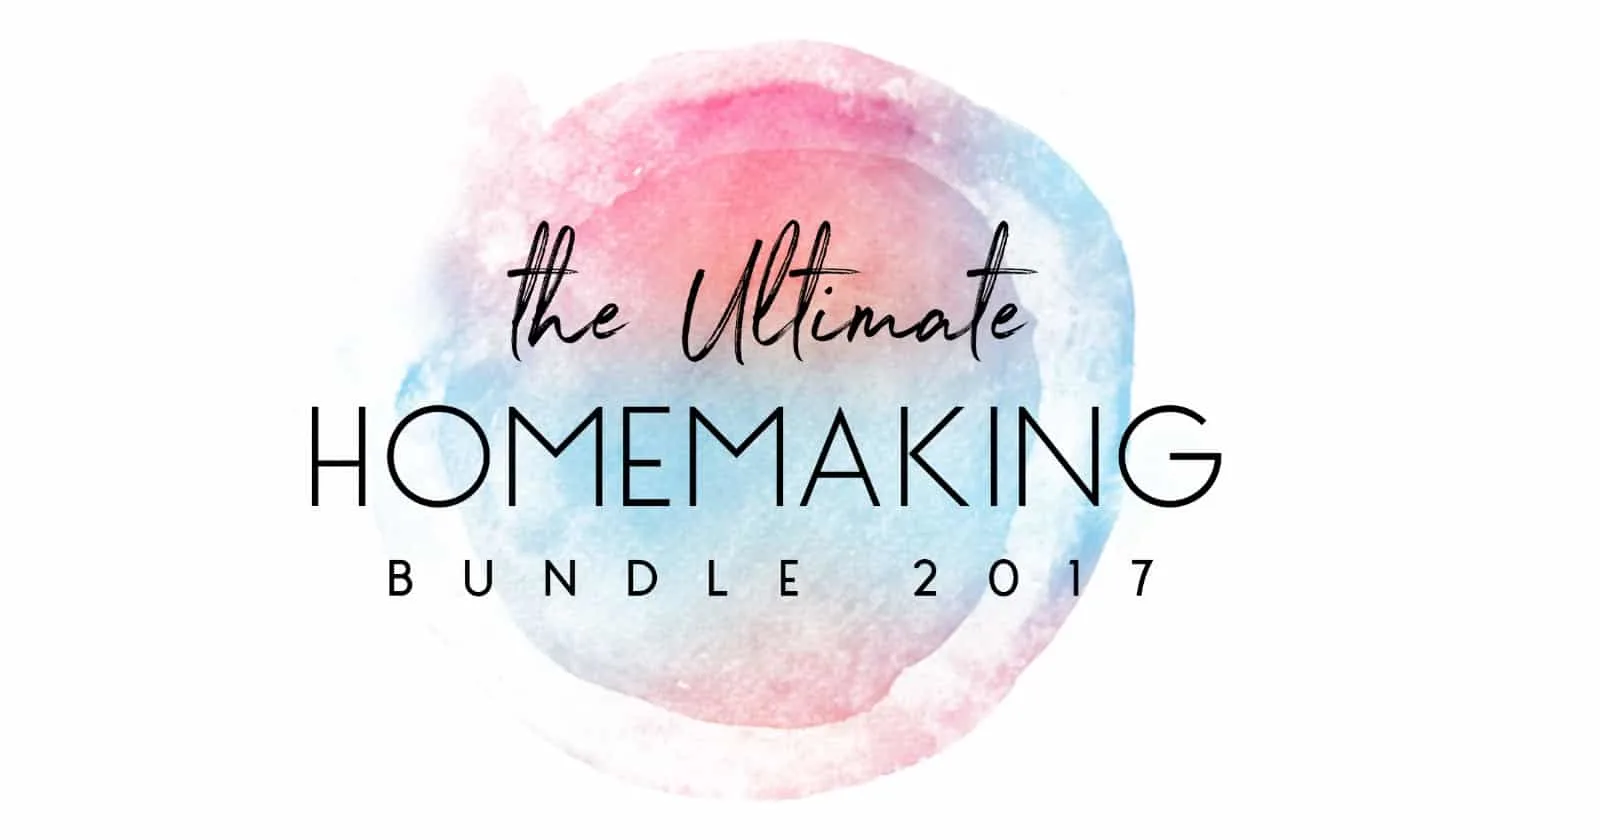 Image graphic with text for the Ultimate Homemaking Bundle 2017.